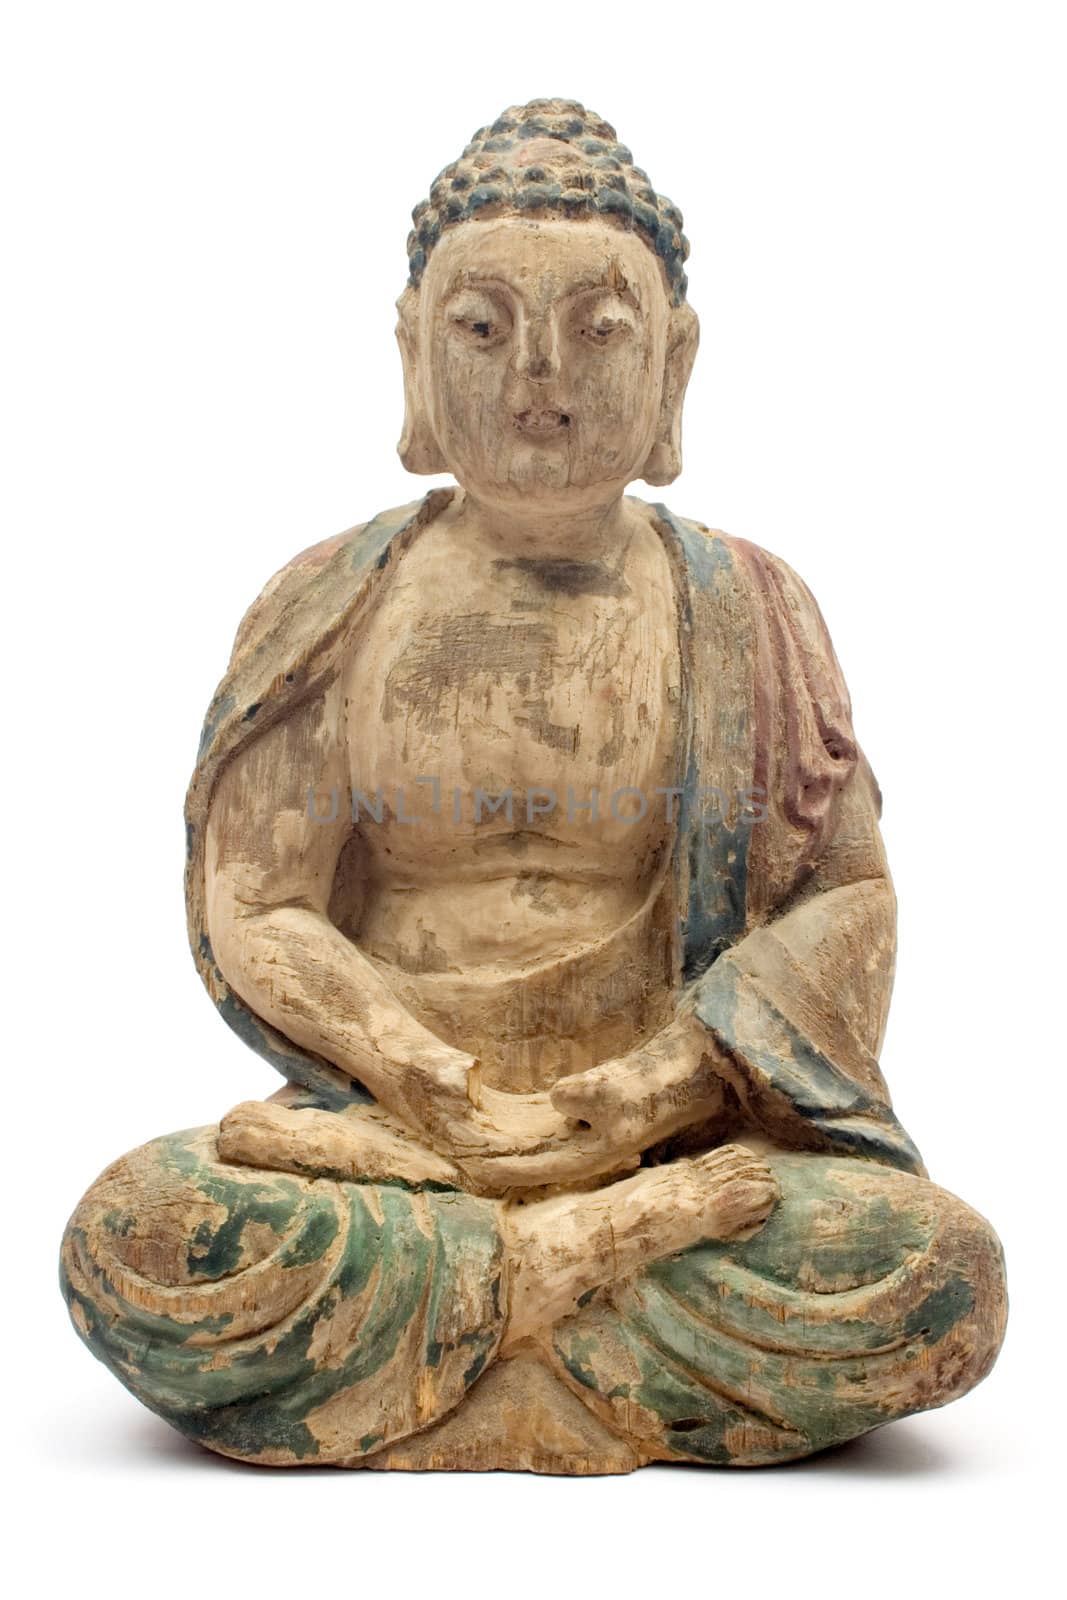 Antique Wooden Buddha by winterling